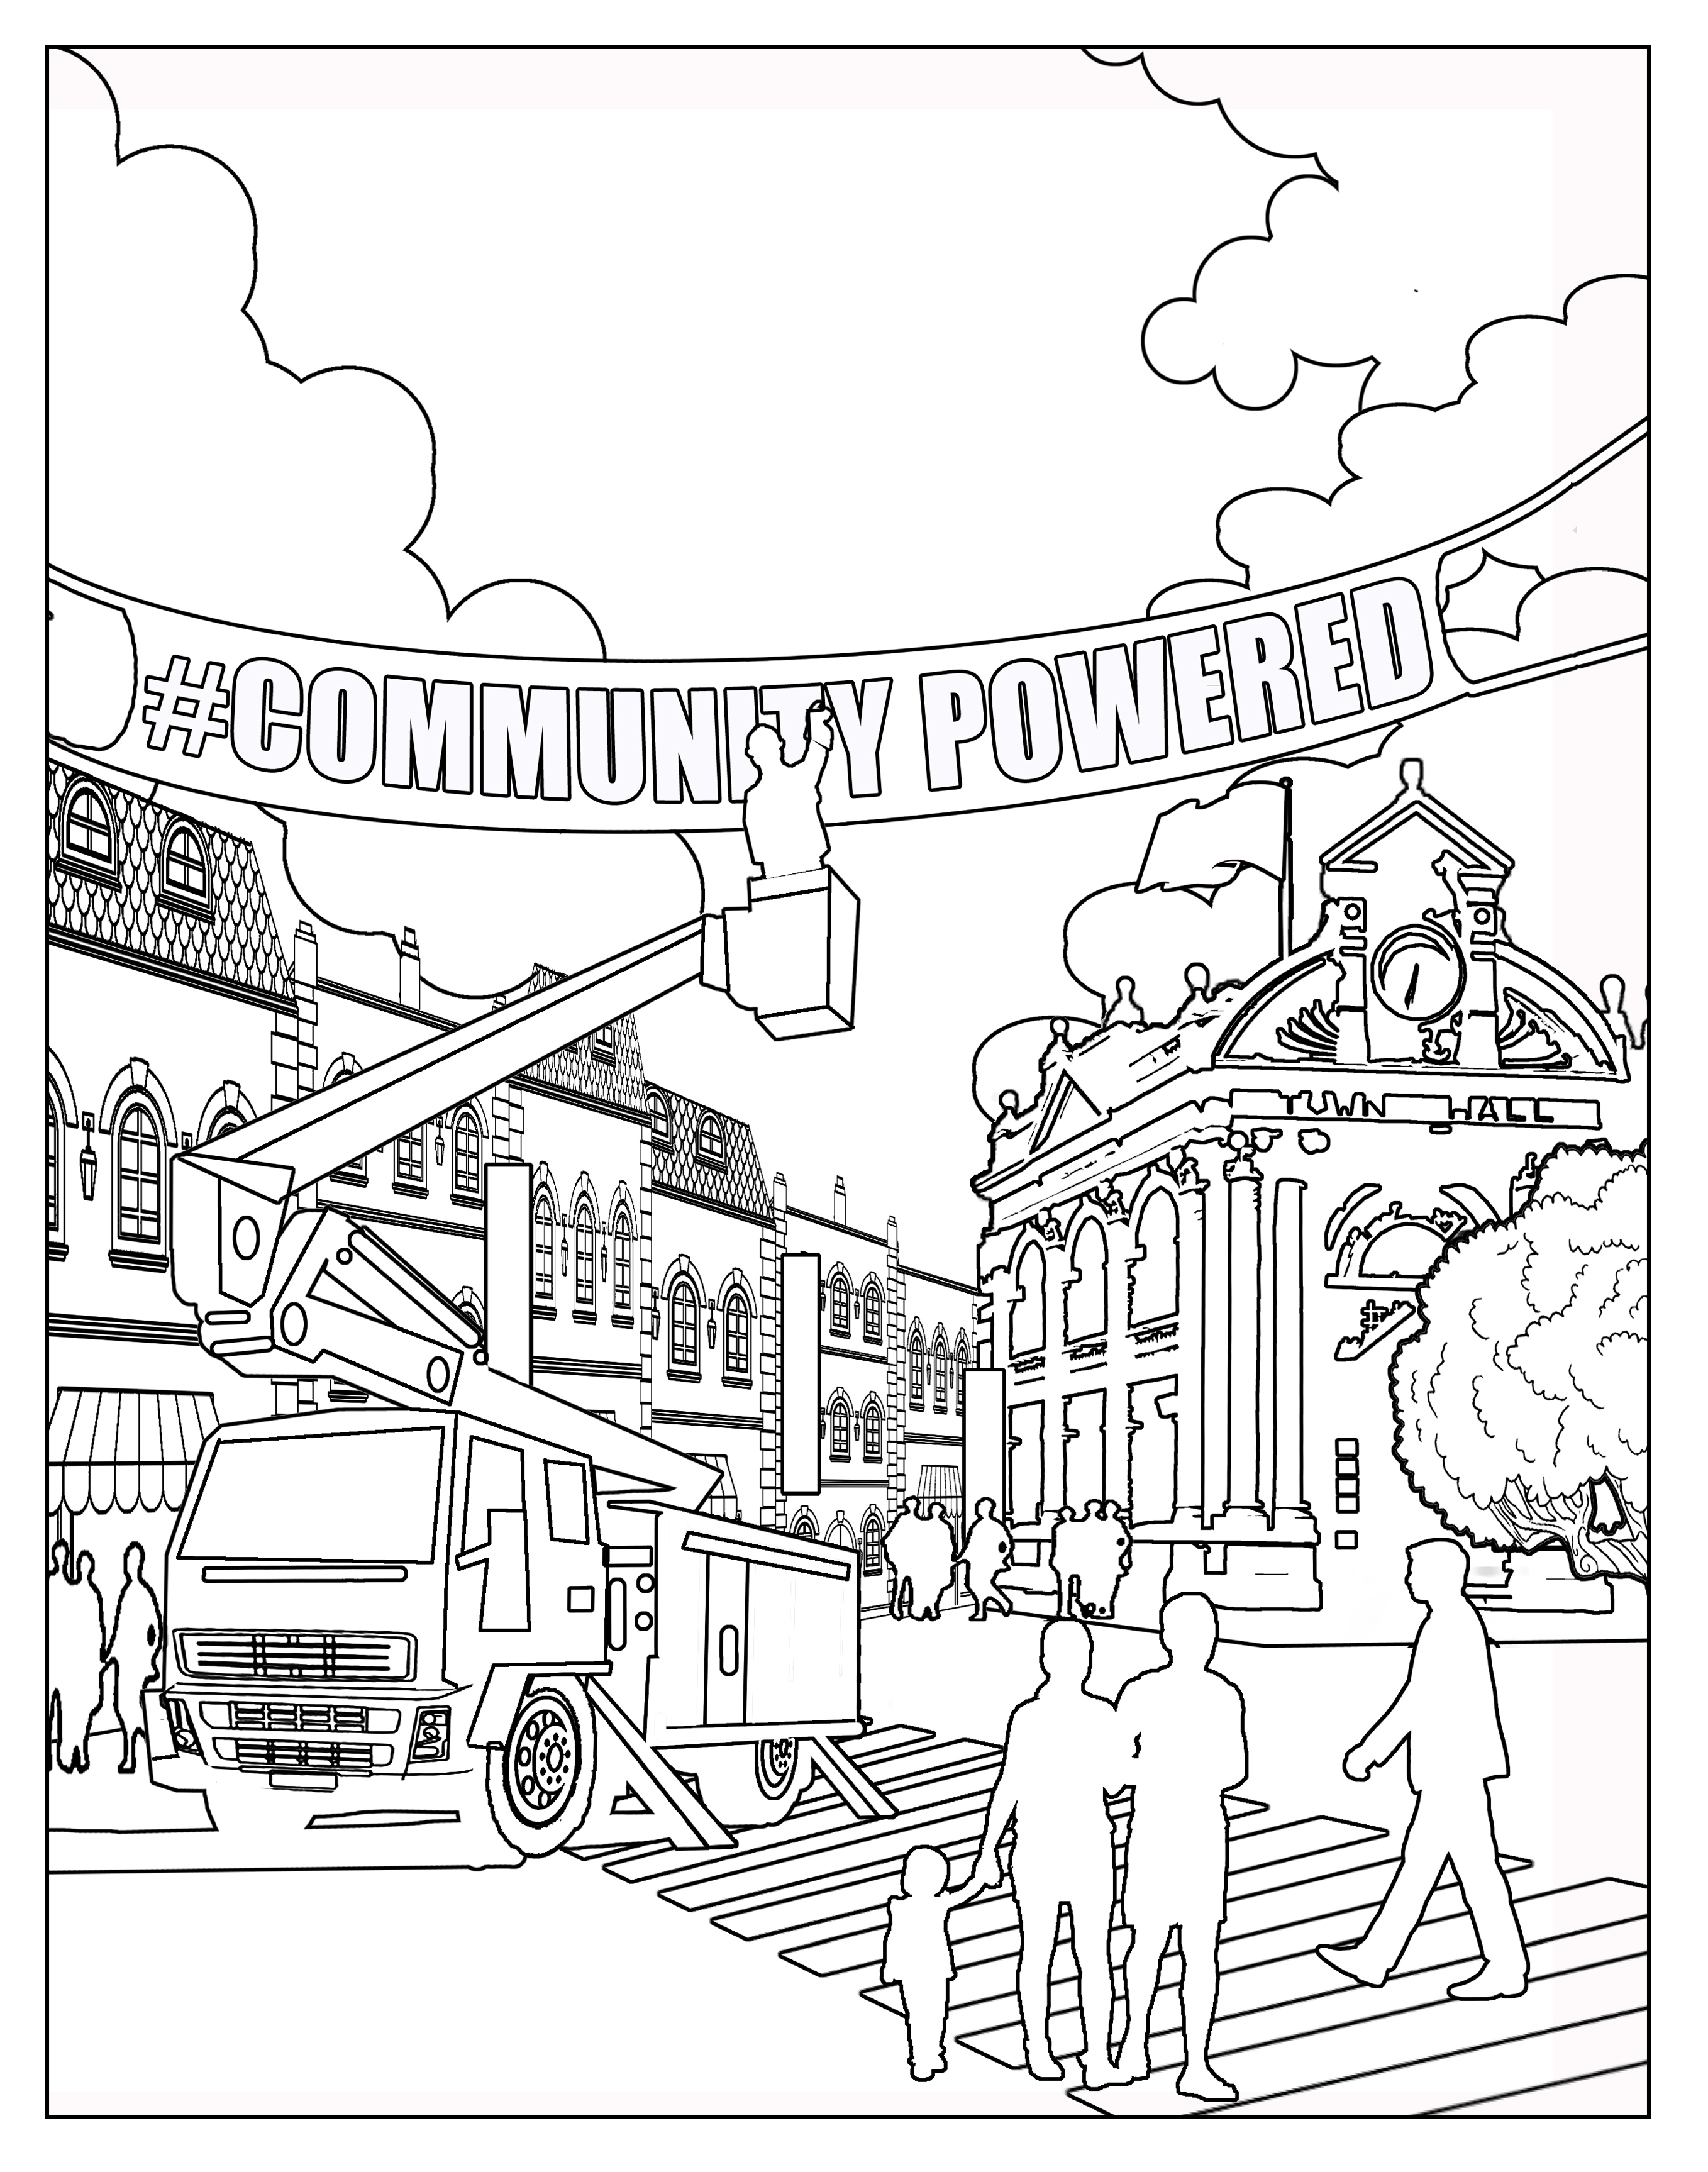 Blank coloring sheet of a town with a bucket truck hanging a banner that reads 